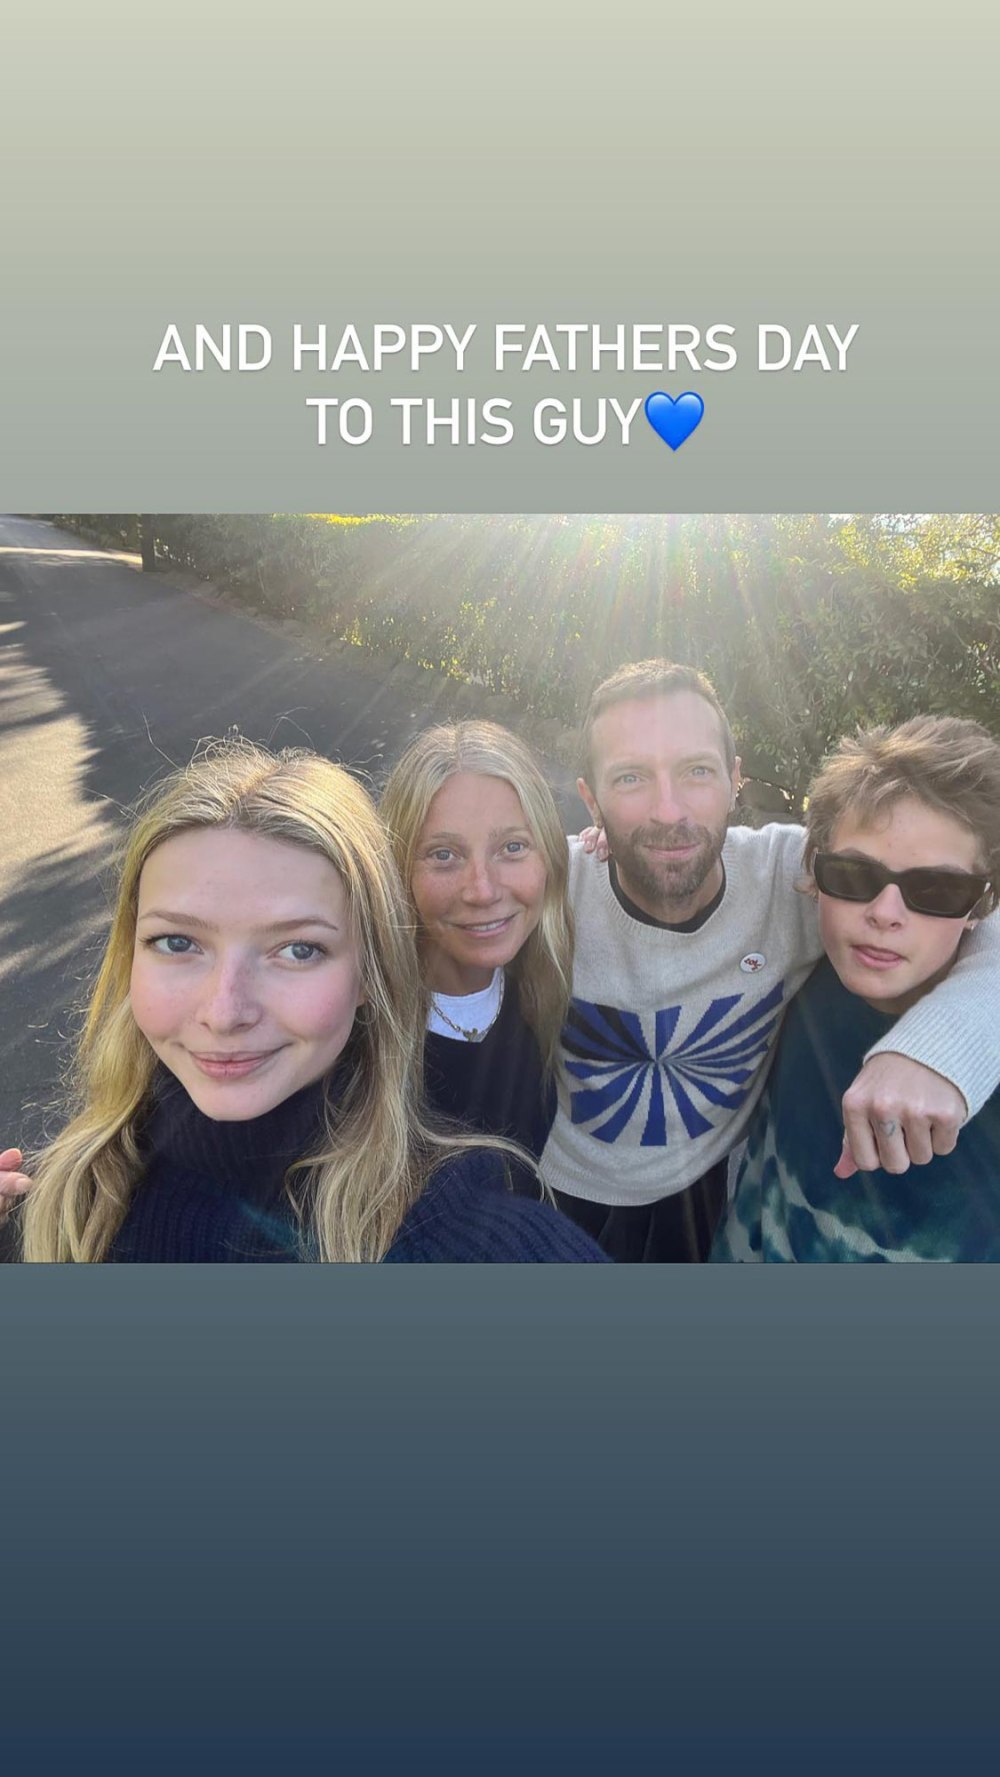 Gwyneth-Paltrow-Honors-Husband-Brad-Falchuk--Ex-Chris-Martin-in-Sweet-Father-s-Day-Tribute-504